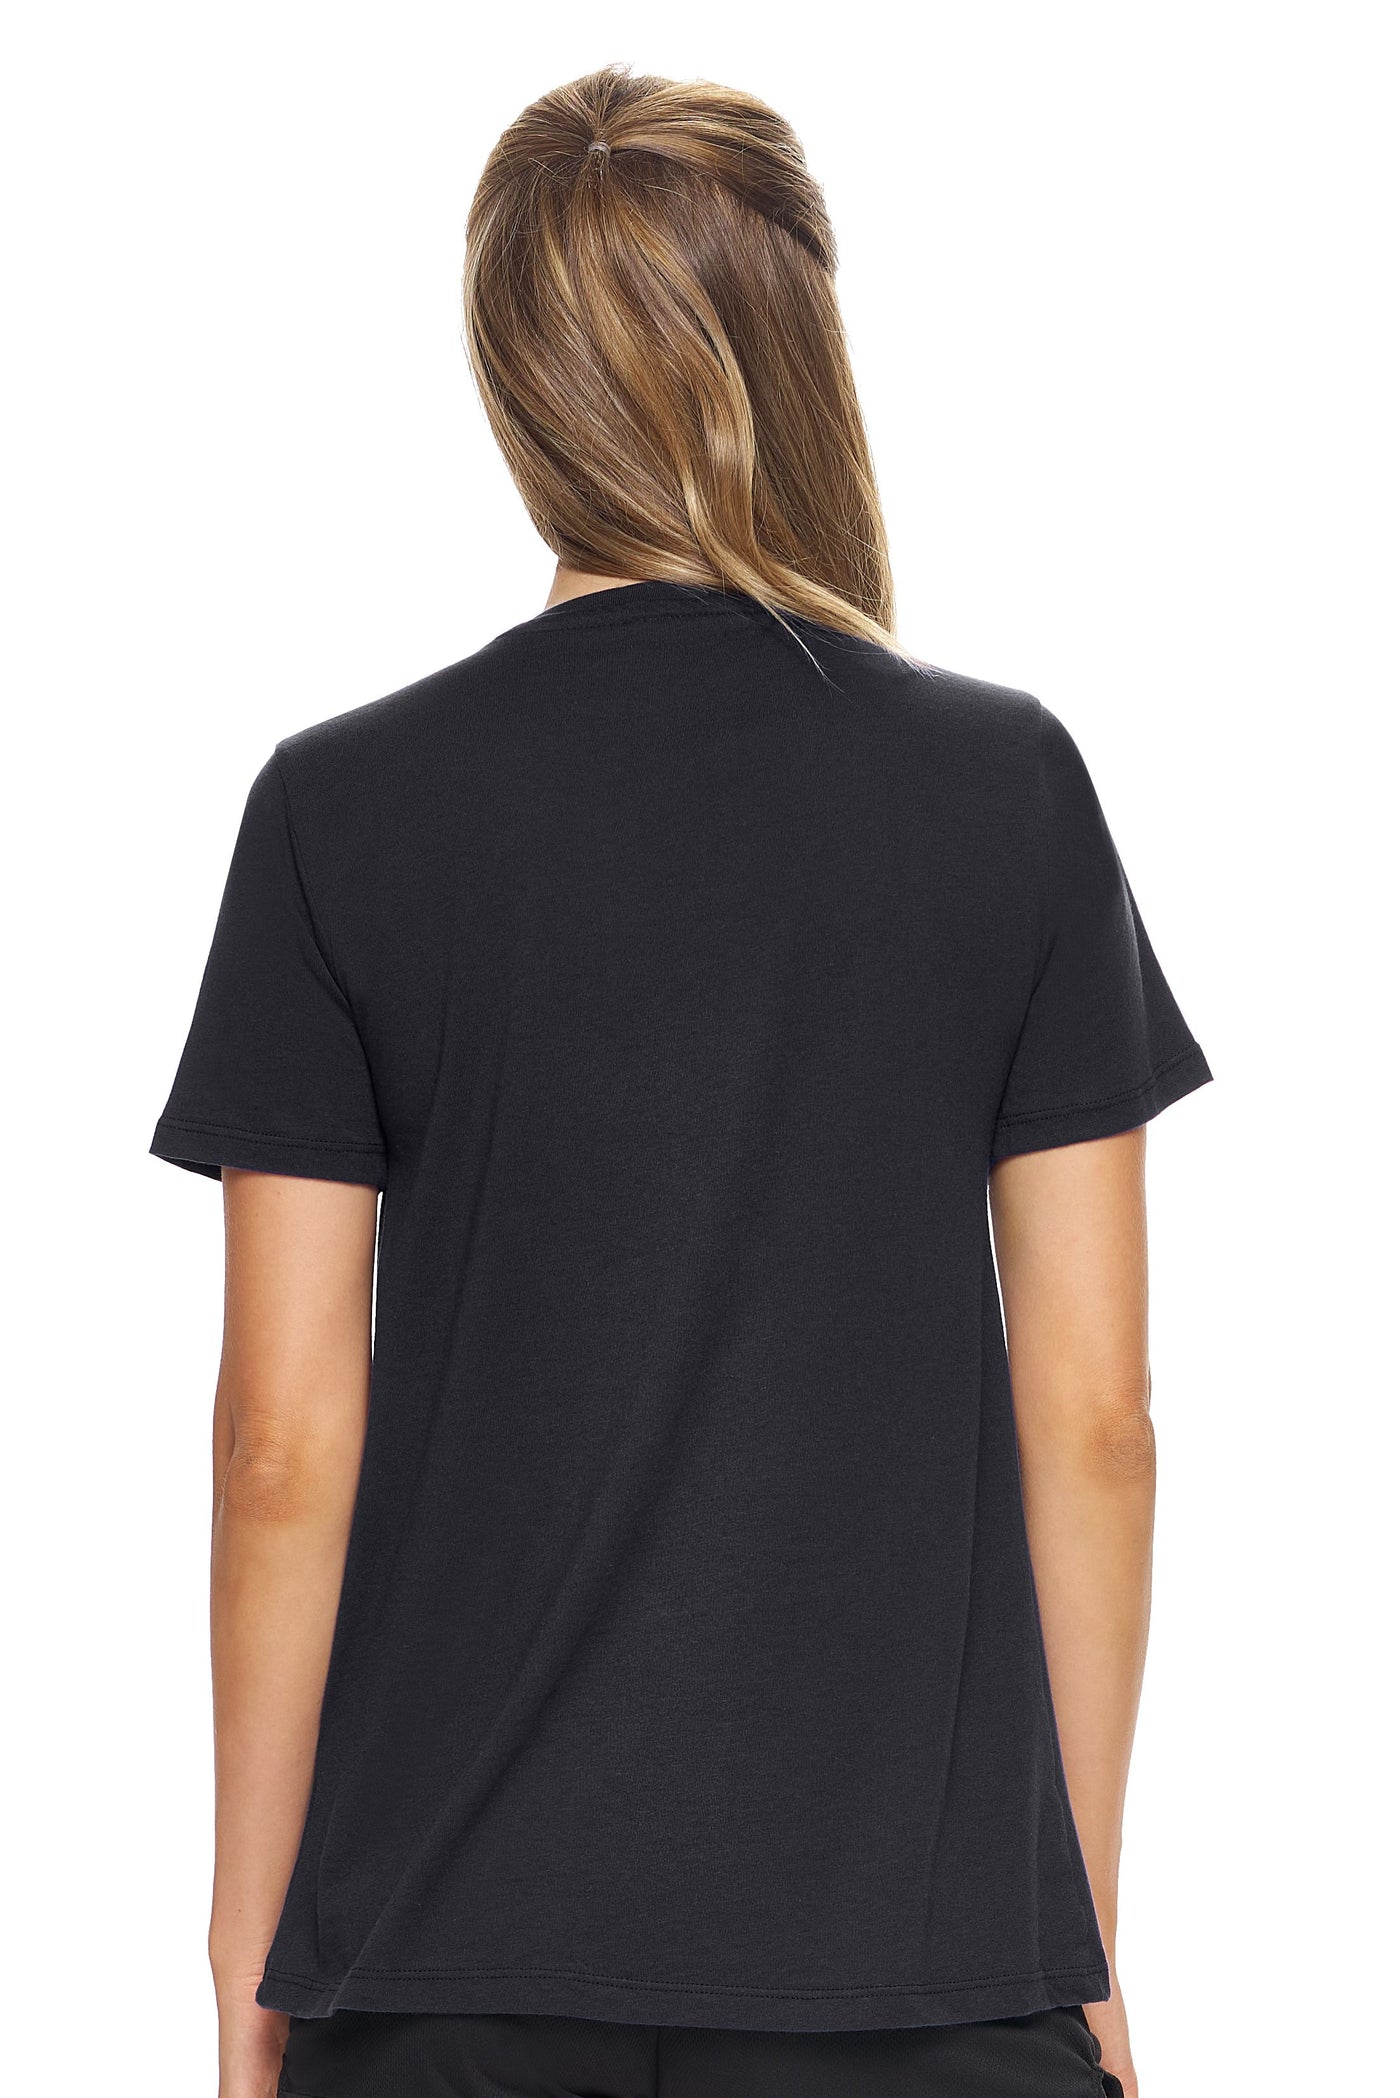 Expert Brand Retail Sustainable Eco-Friendly Micromodal Cotton Women's V-neck T-shirt Made in the USA black 3#color_black